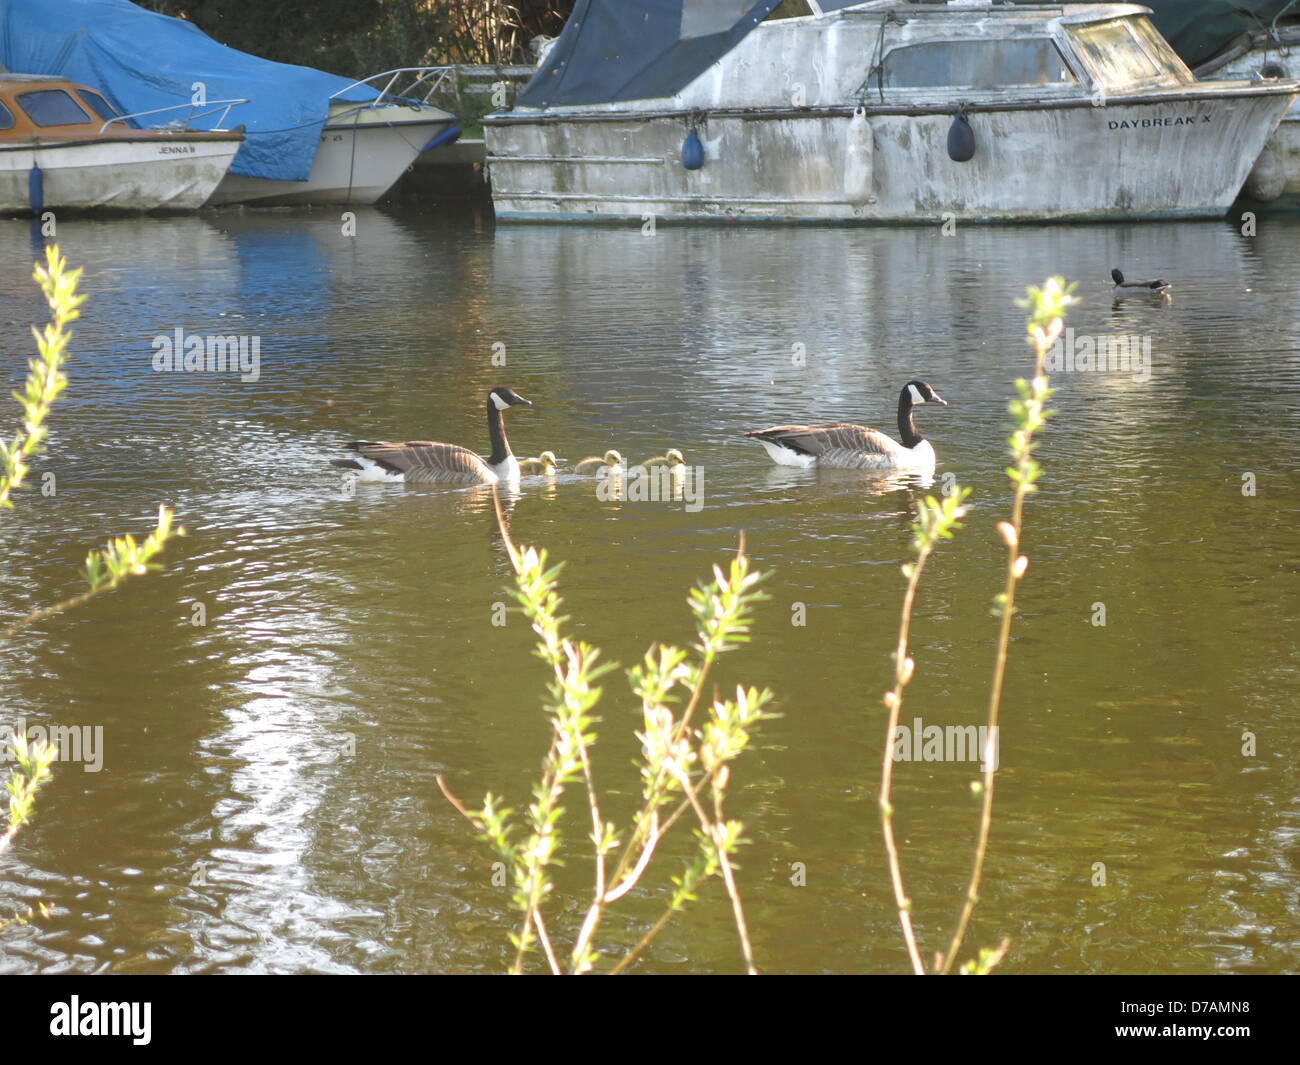 Reading, Berkshire, UK. 2nd May 2013. Canada Geese and Three Goslings on the River Kennet in Reading, Berkshire, UK 020513.JPG Credit:  Sarah Tubb / Alamy Live News Stock Photo